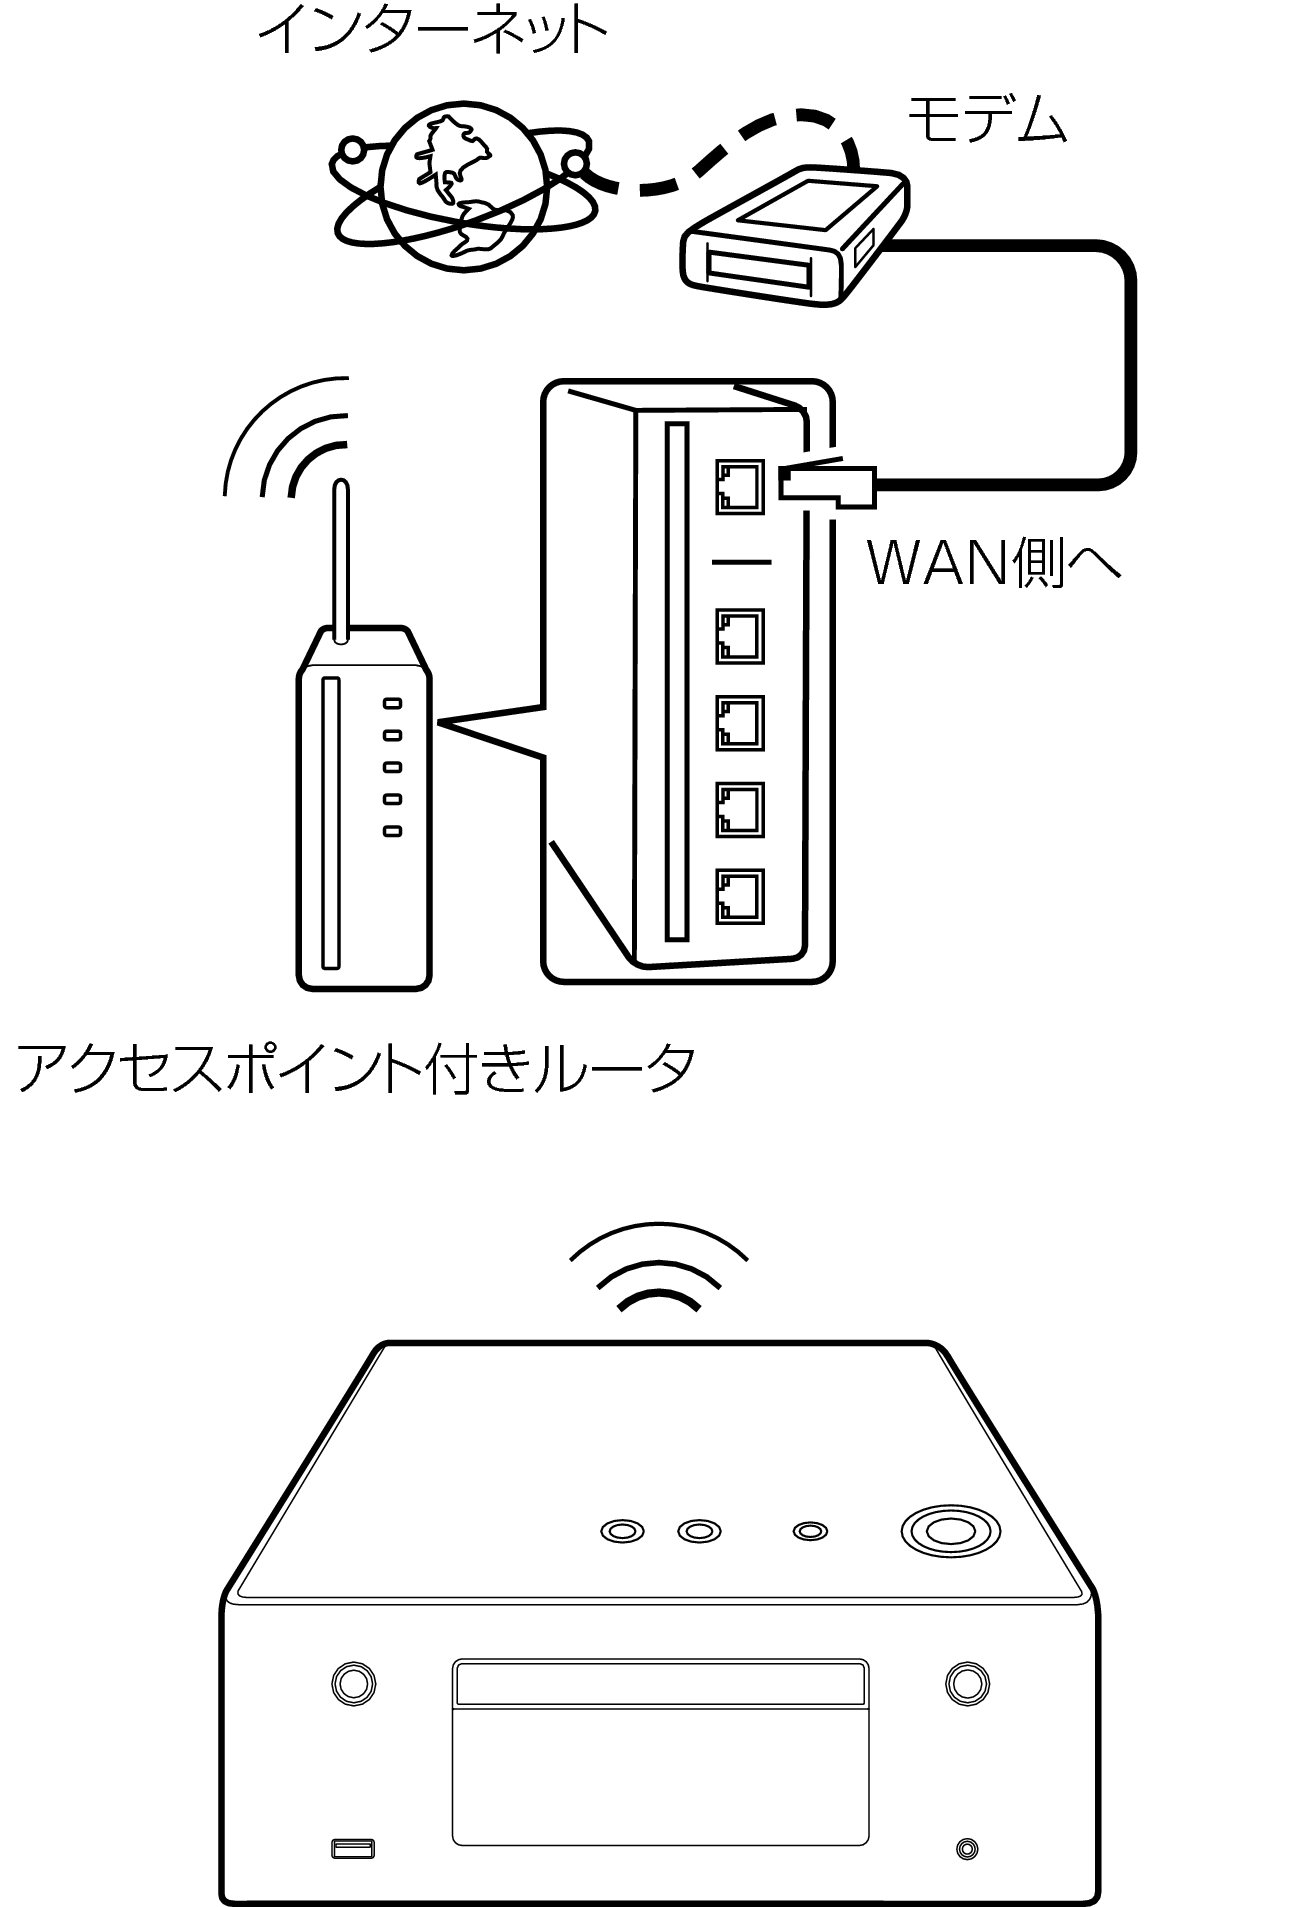 Conne ethernet wifi new